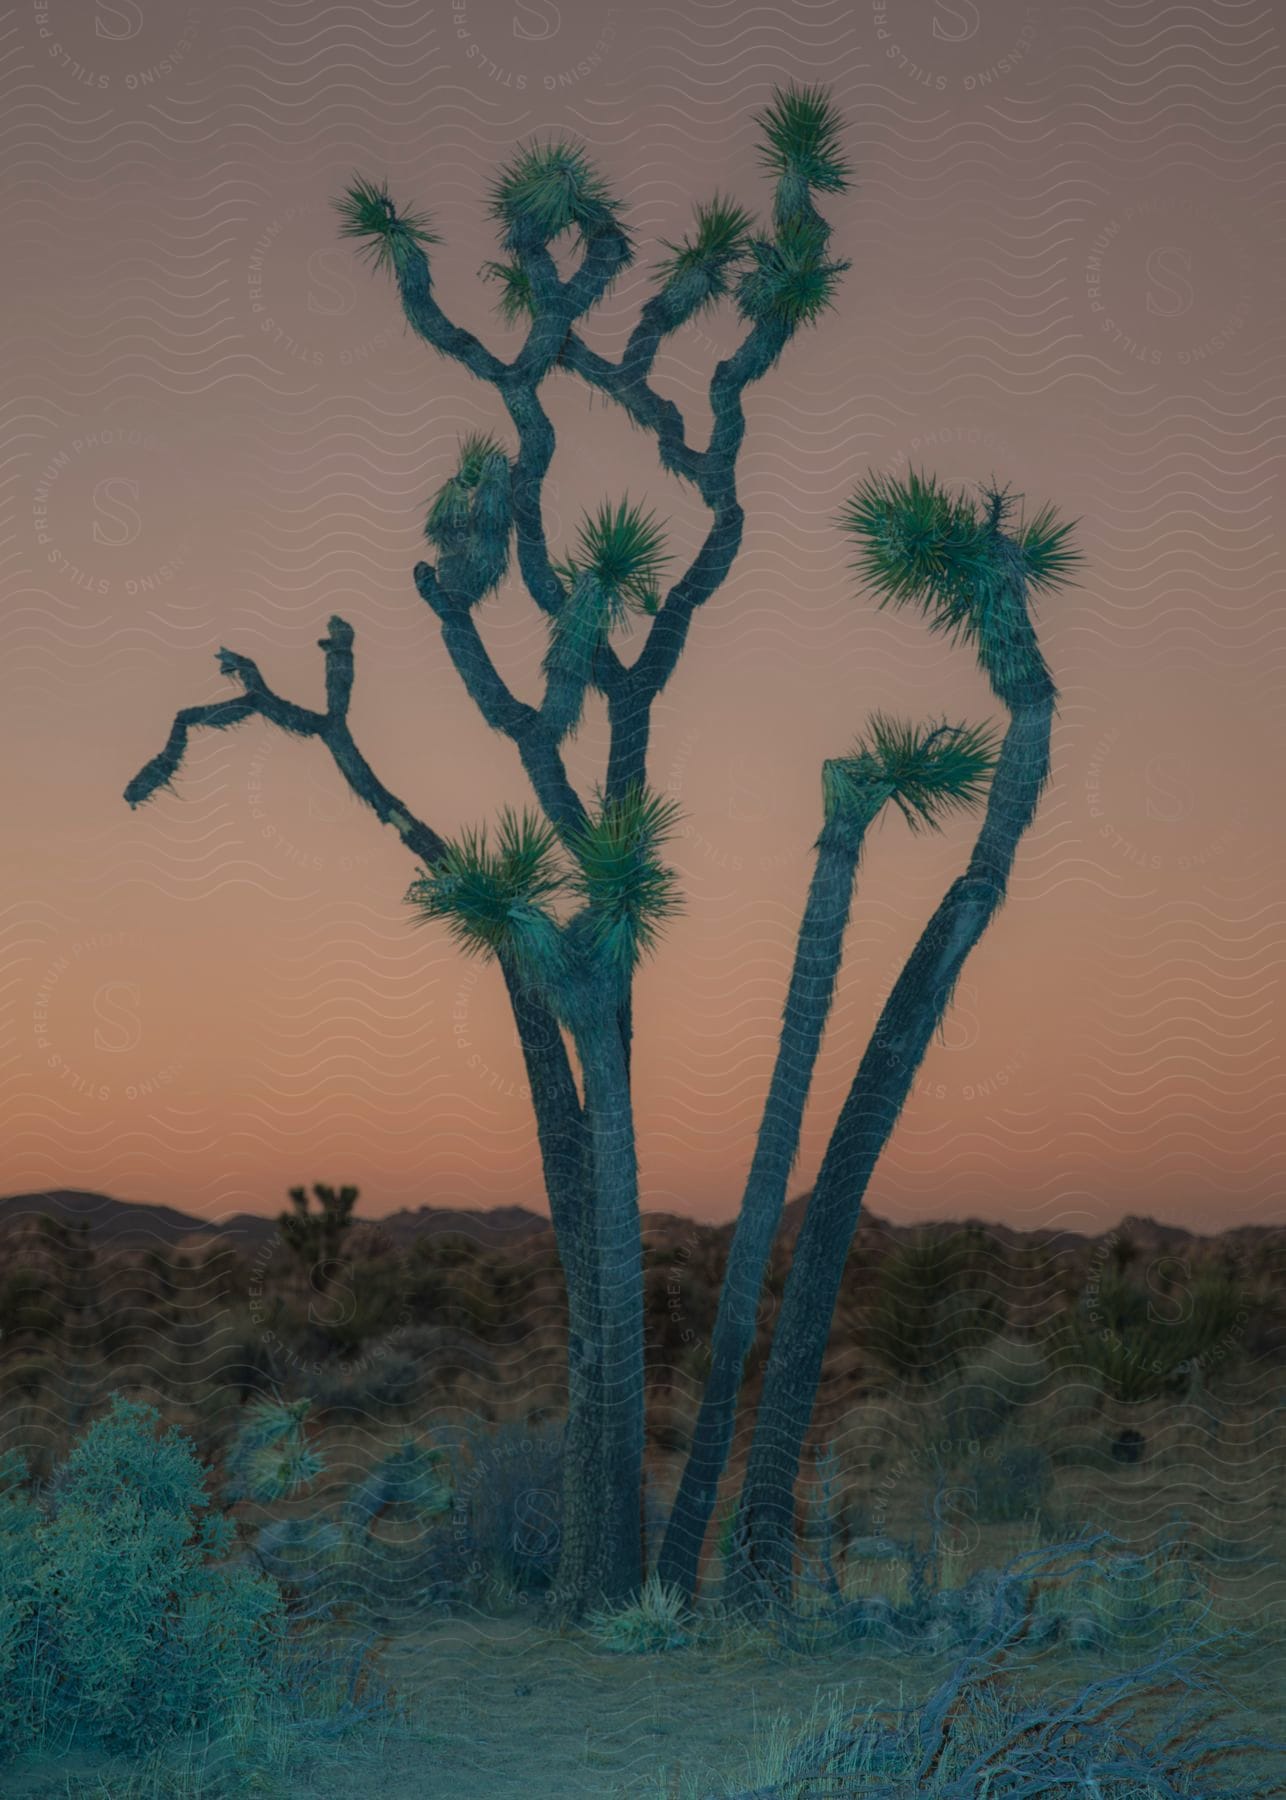 Stock photo of a joshua tree stands alone in the desert landscape